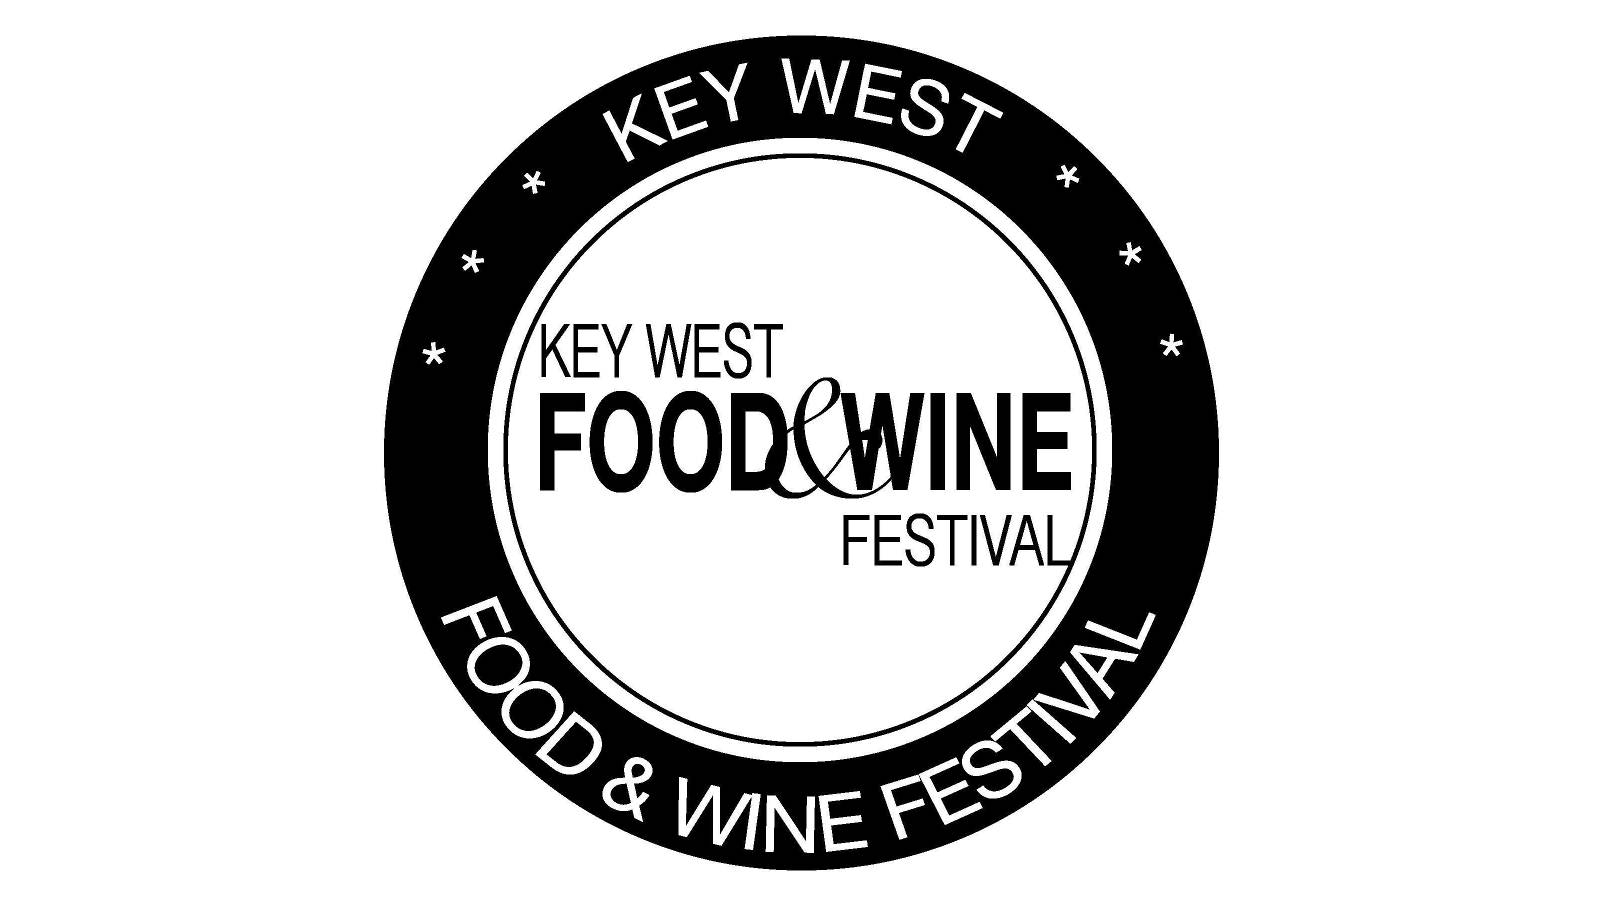 Key West Food and Wine Festival